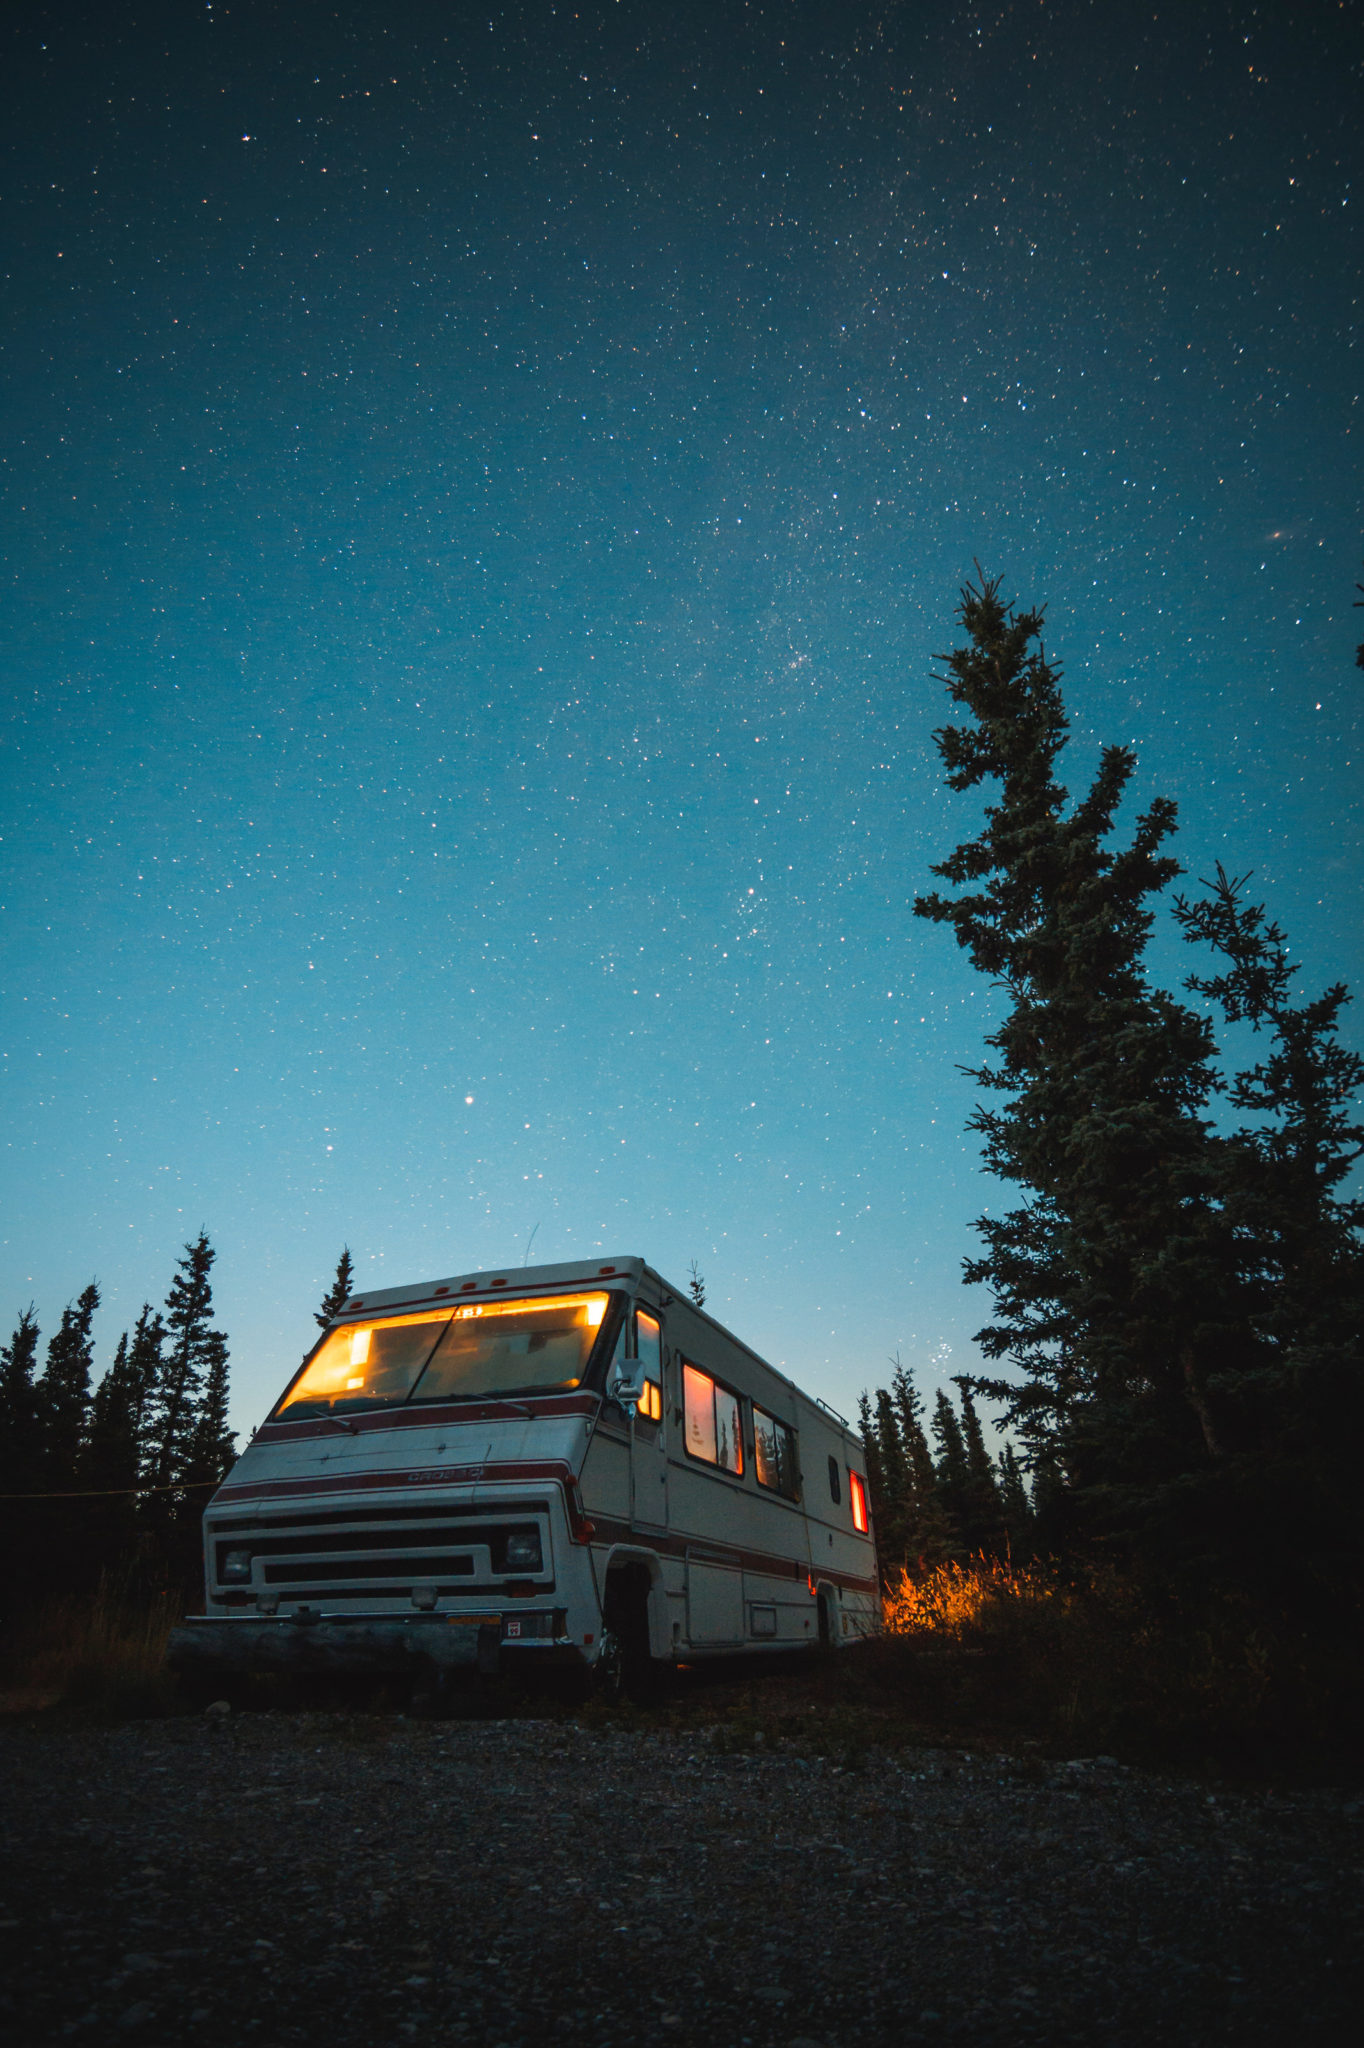 RV in the woods